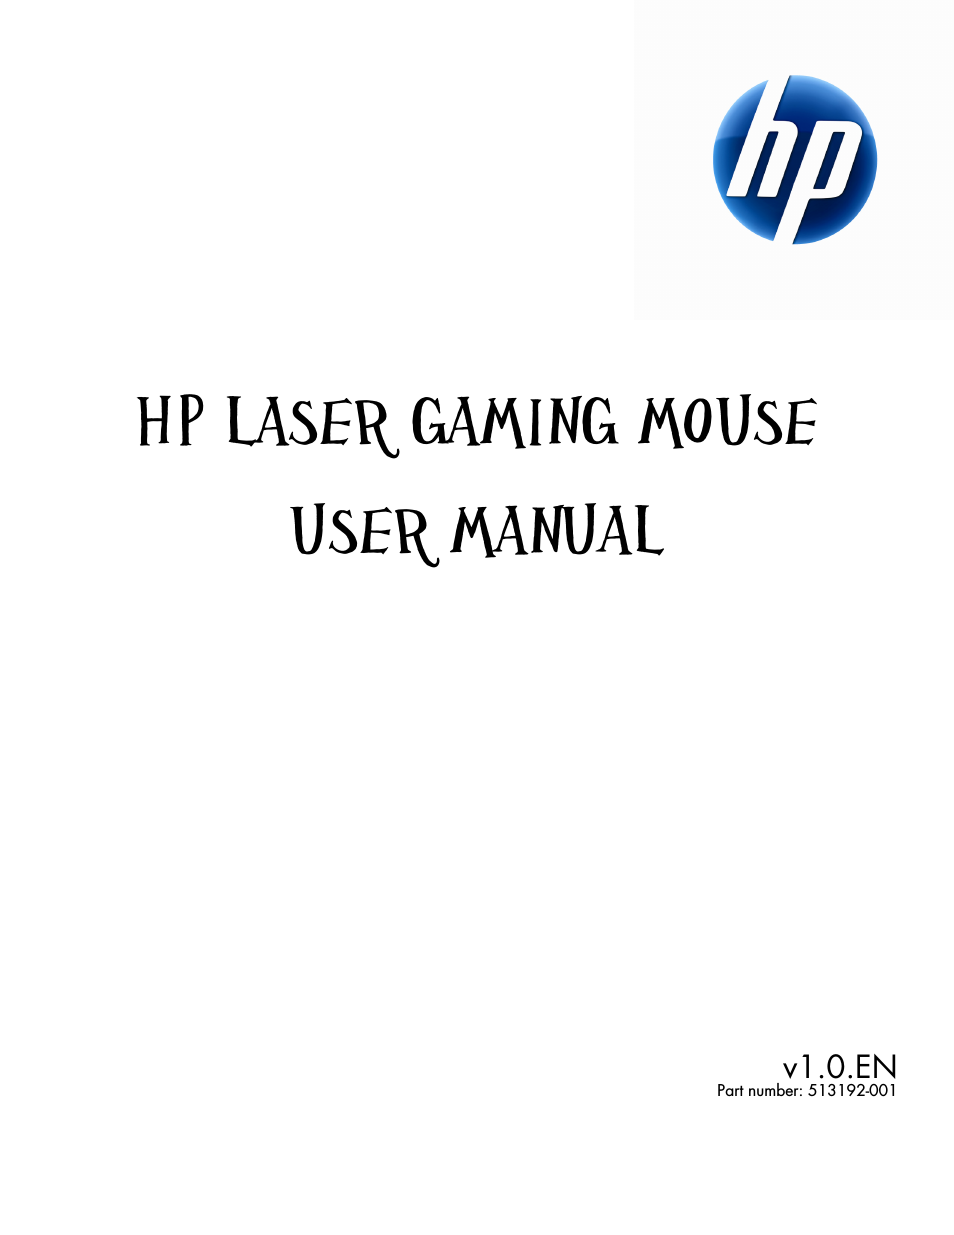 Laser Gaming Mouse